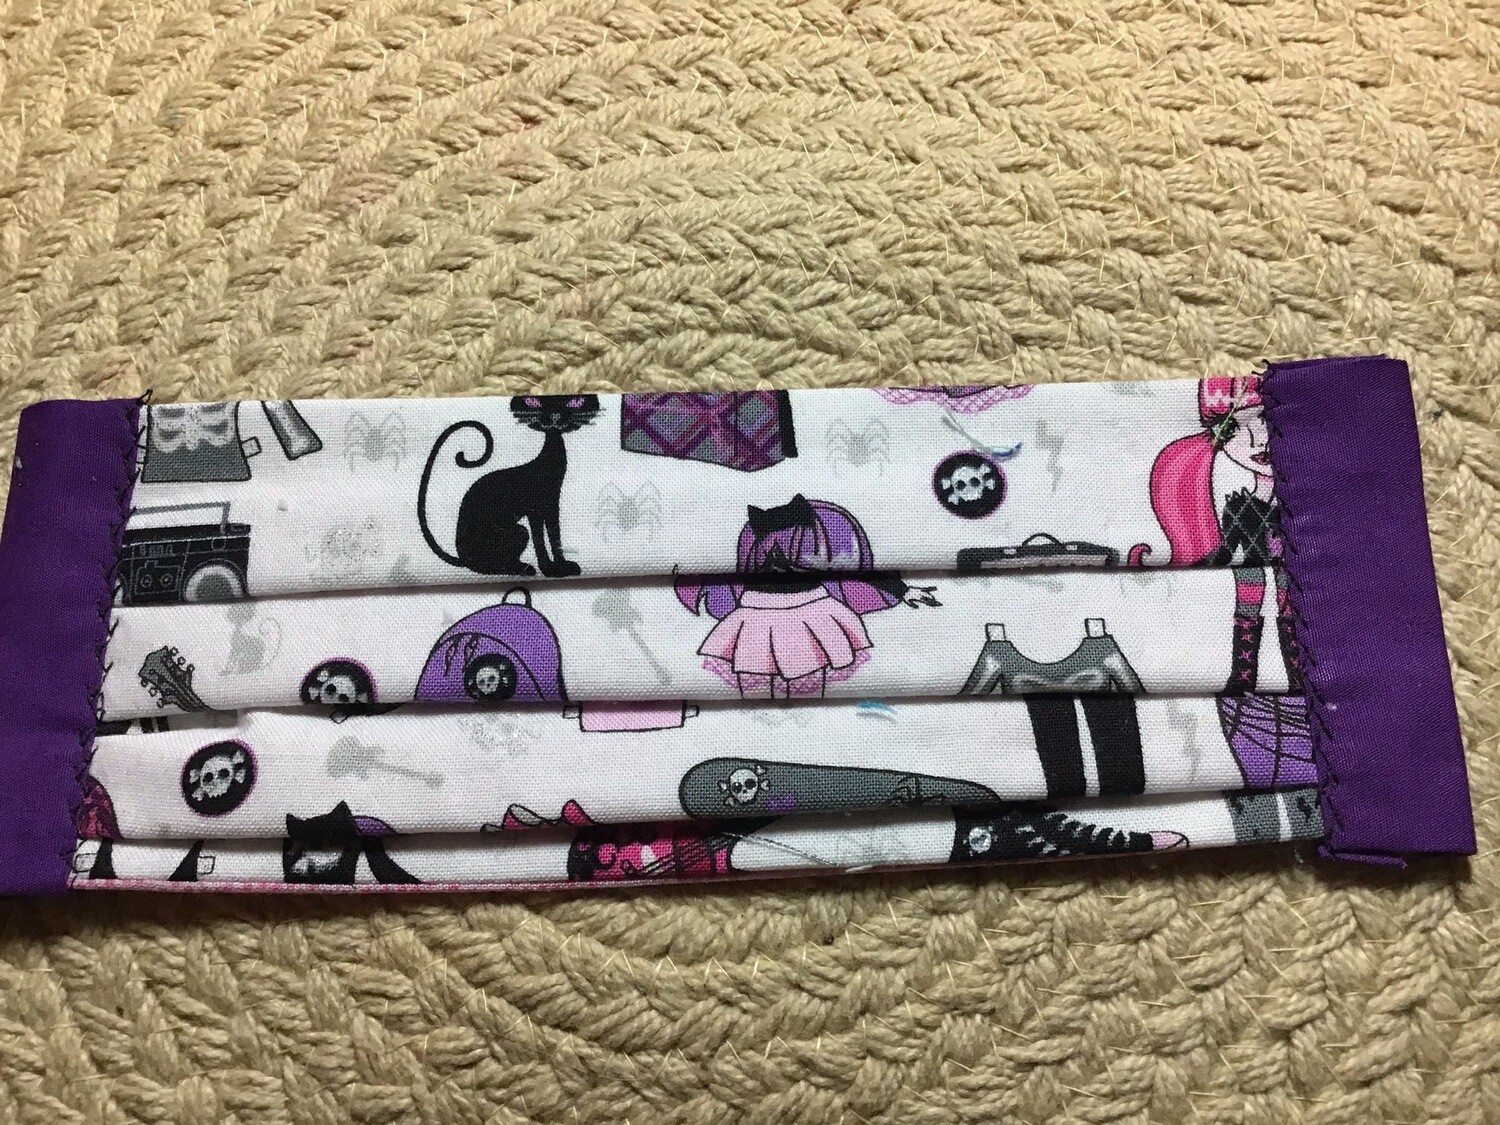 Artisan Prints - Measures 61/2 “- 2 Elastic Straps Included